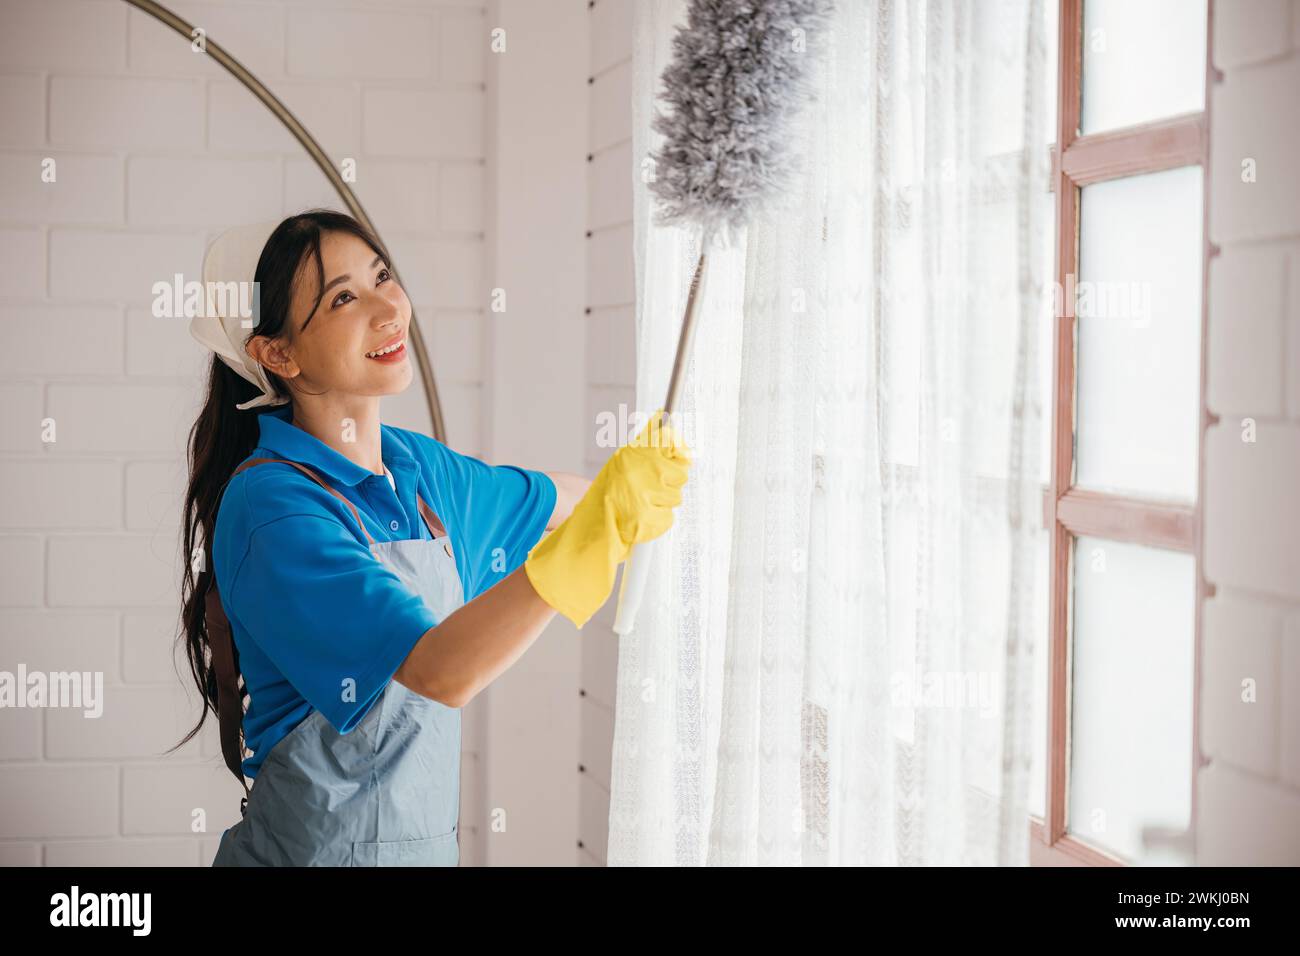 Occupation in action, Asian woman dusts window blinds holding duster. Her smile shows happiness in Stock Photo